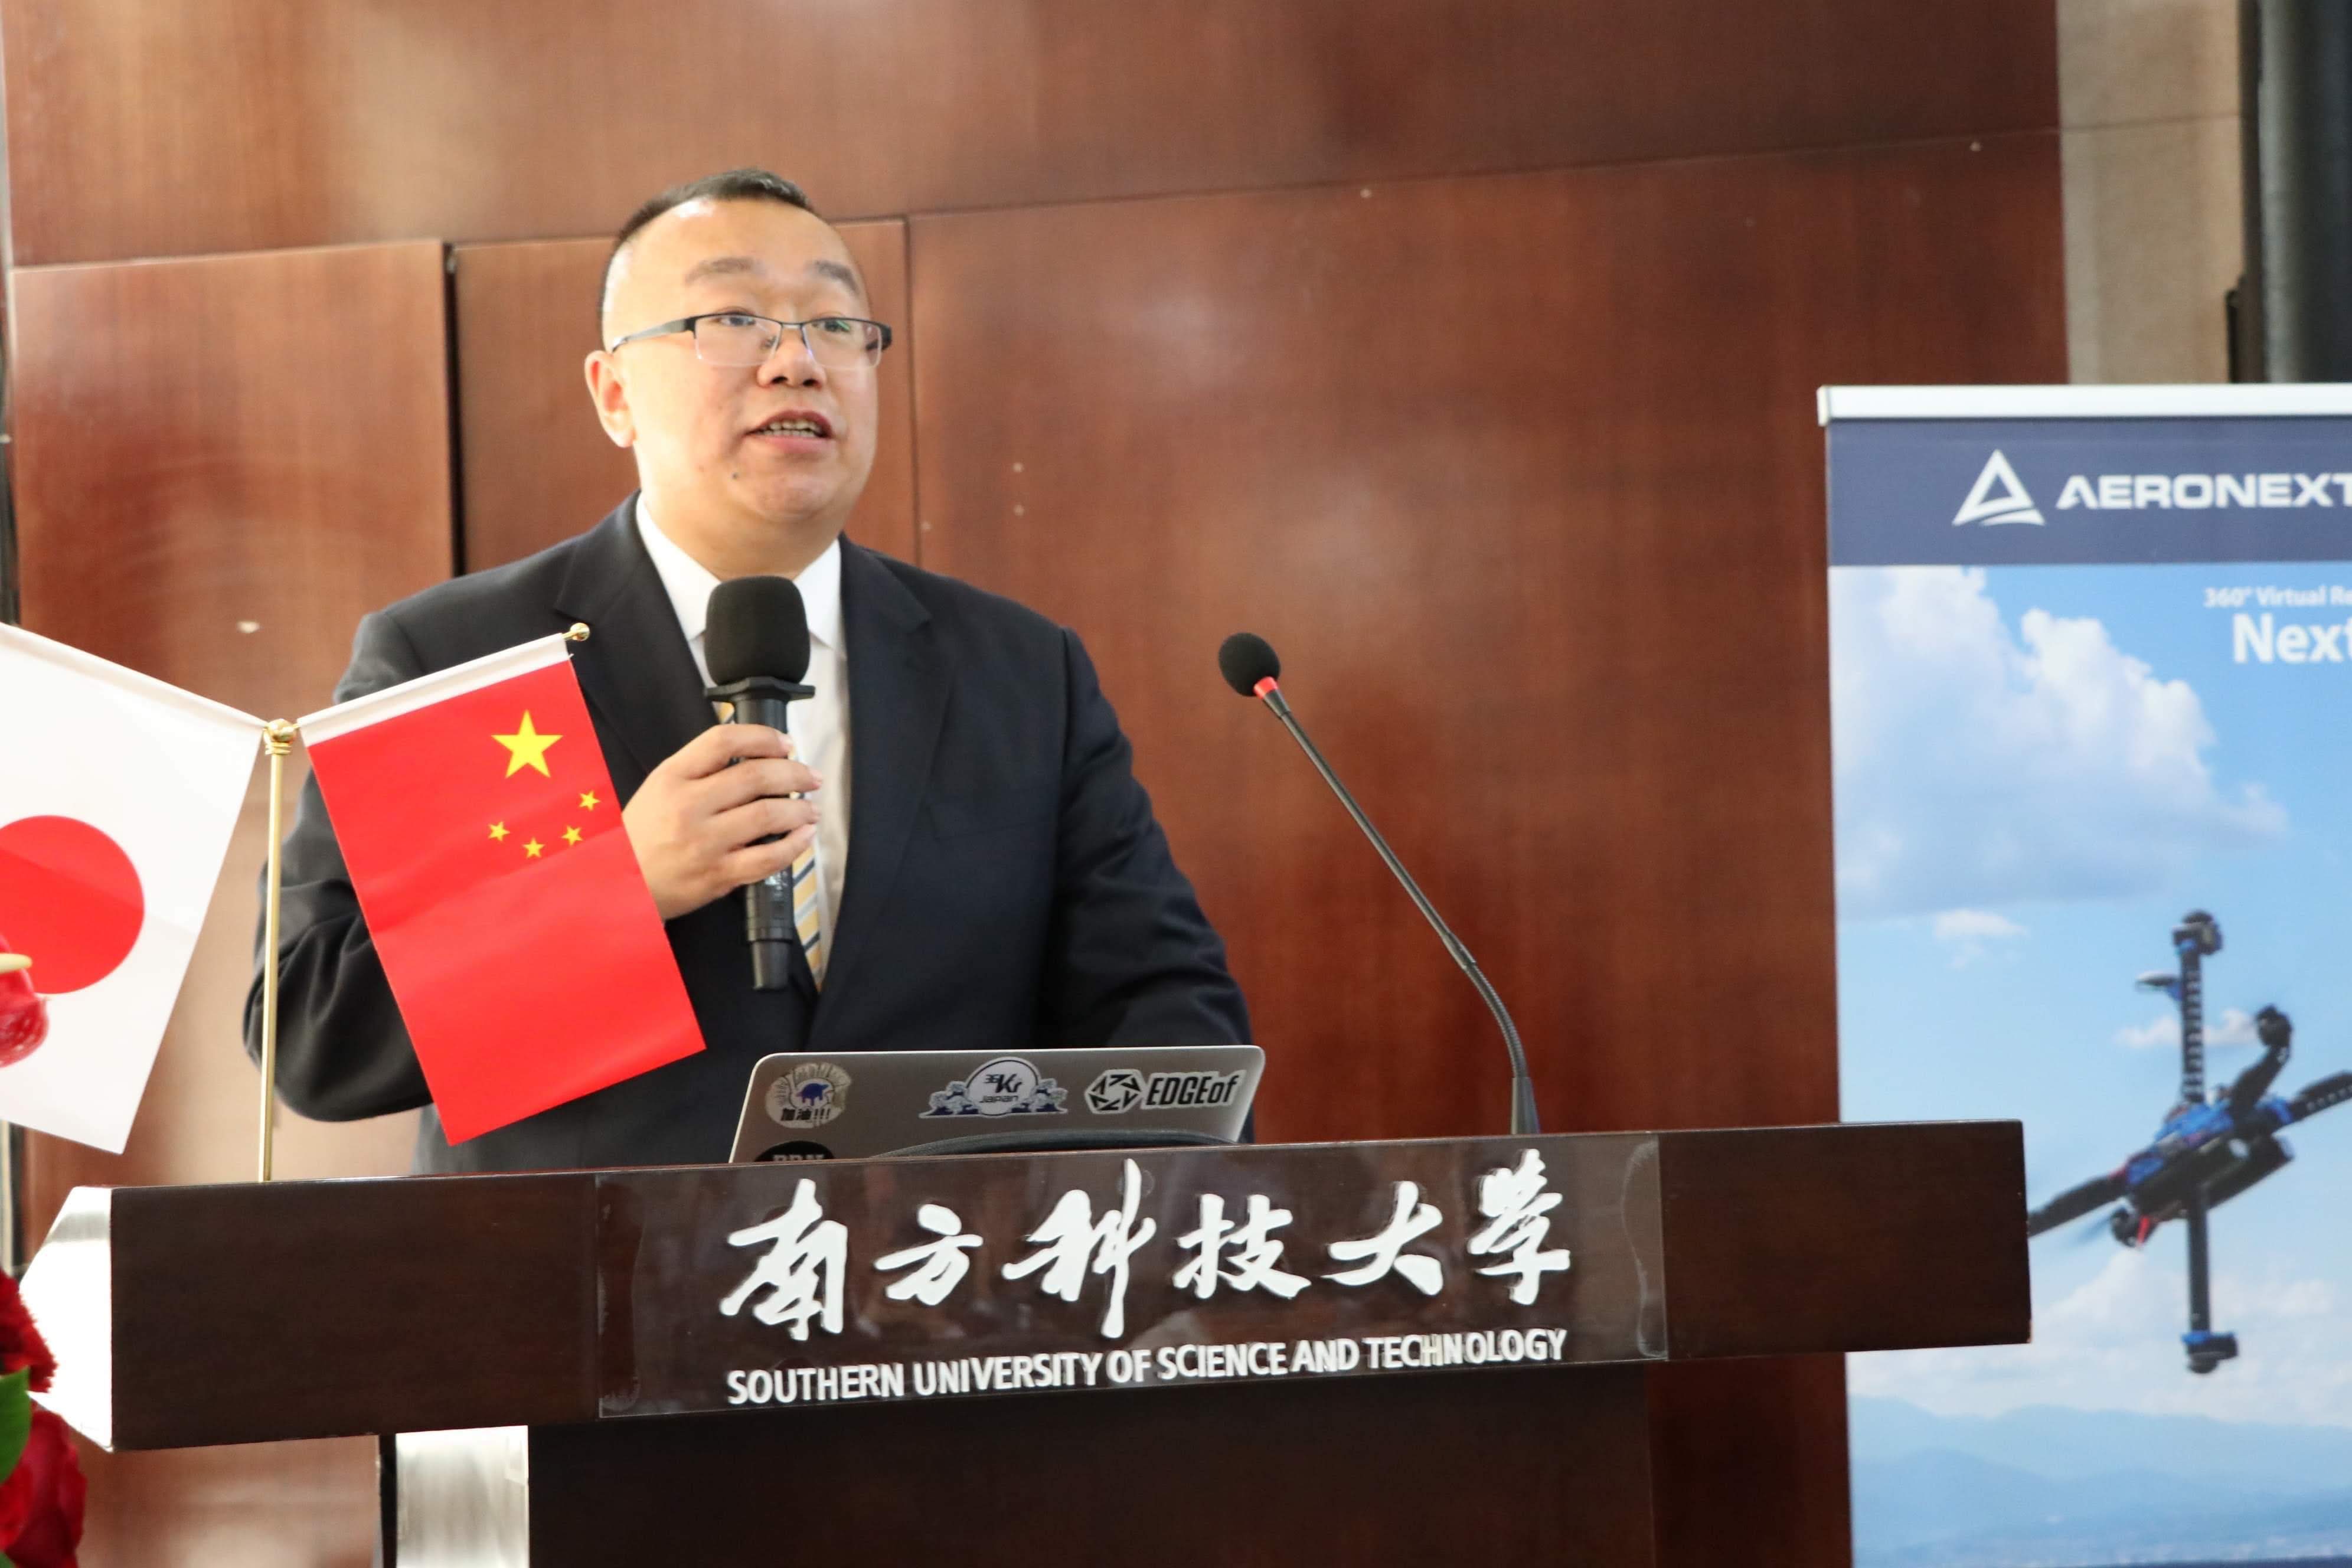 Chen Si Qi, Secretary General, Southern University of Science and Technology